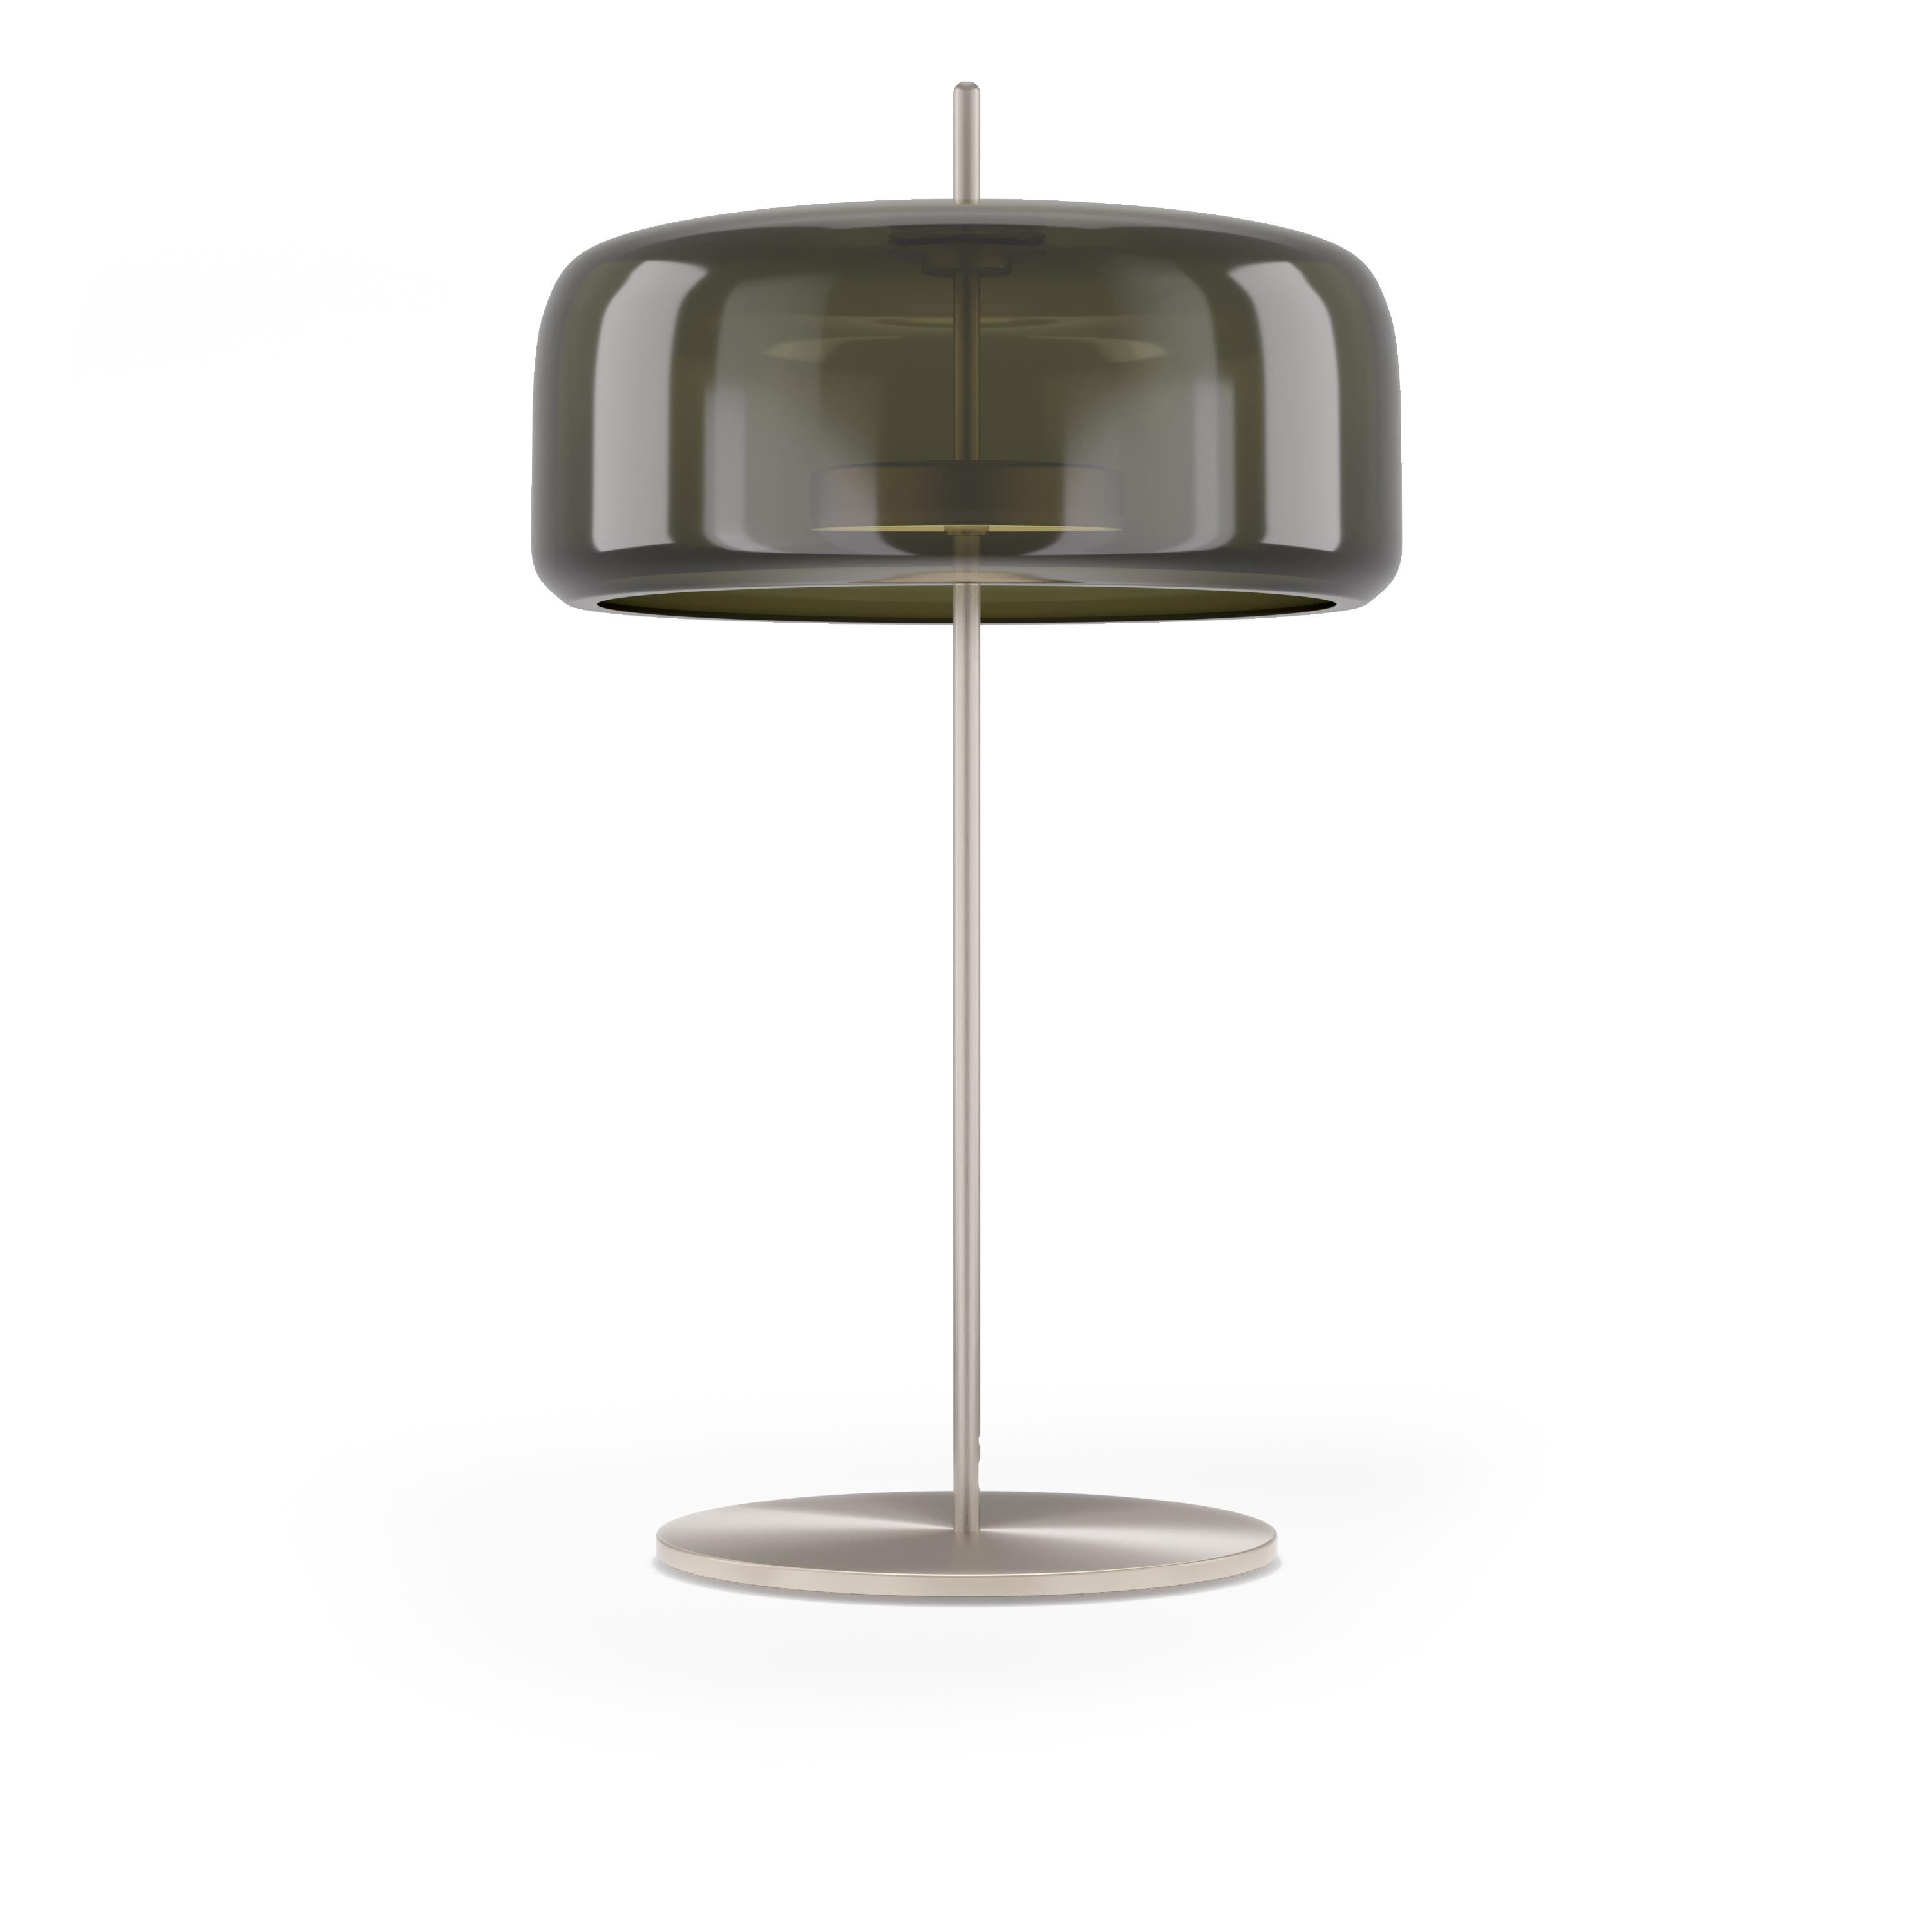 Modern Vistosi Jube Table Lamp in Old Green Transparent Glass And Matt Steel Finish For Sale